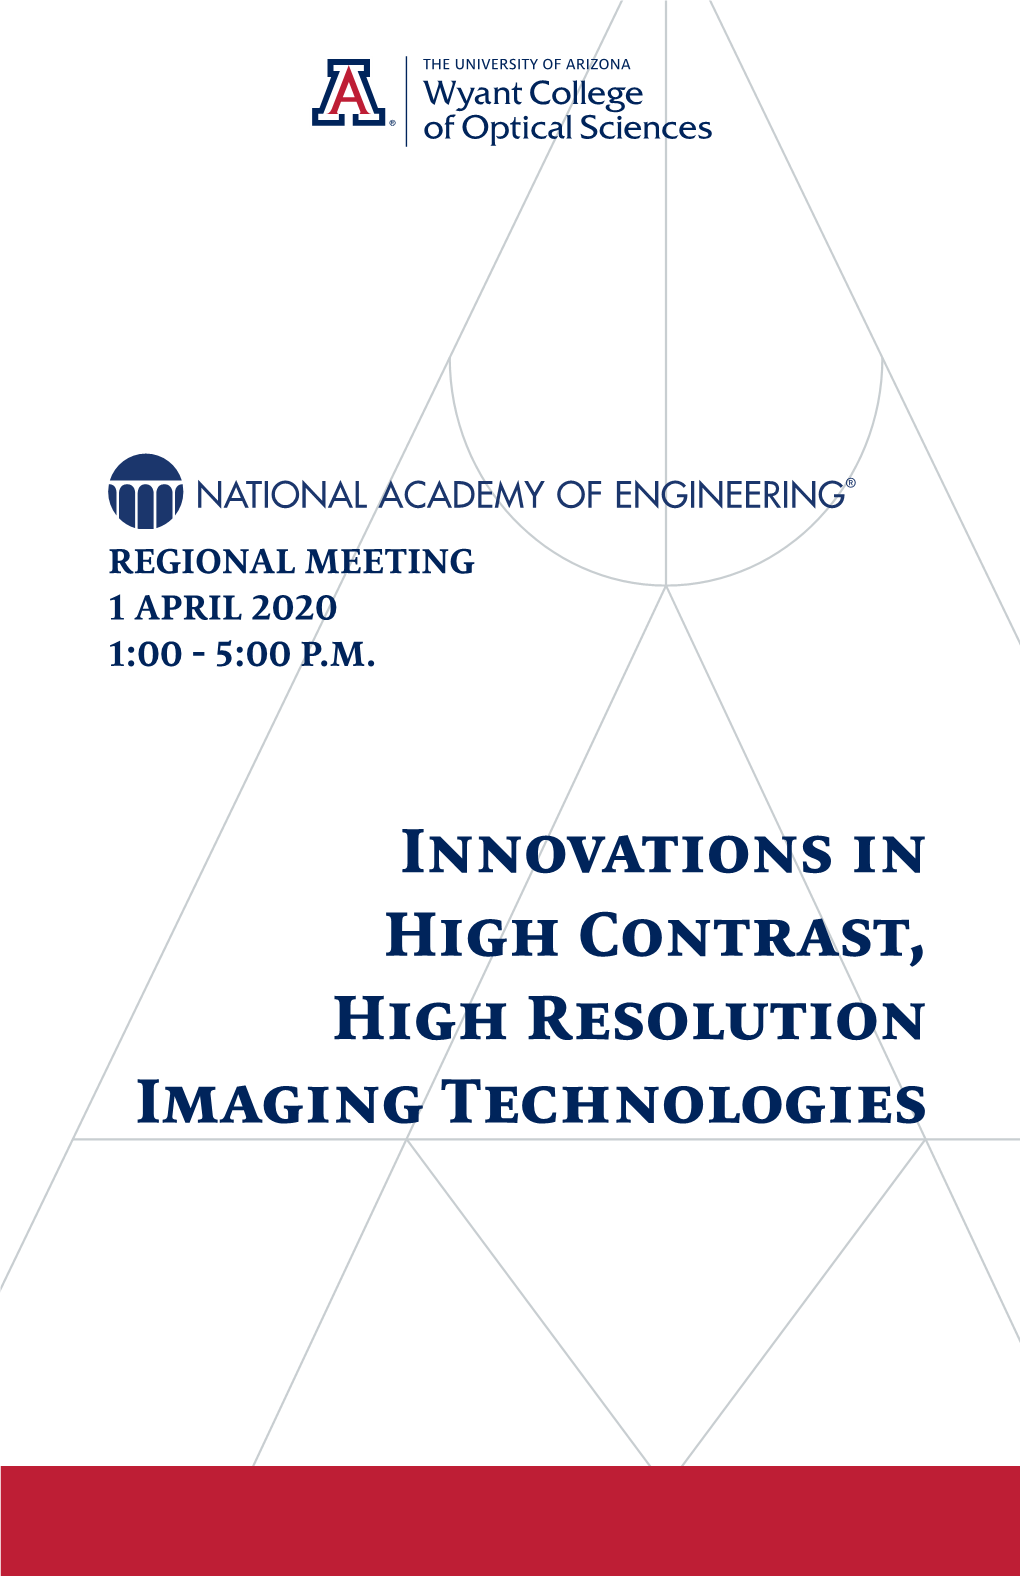 Innovations in High Contrast, High Resolution Imaging Technologies